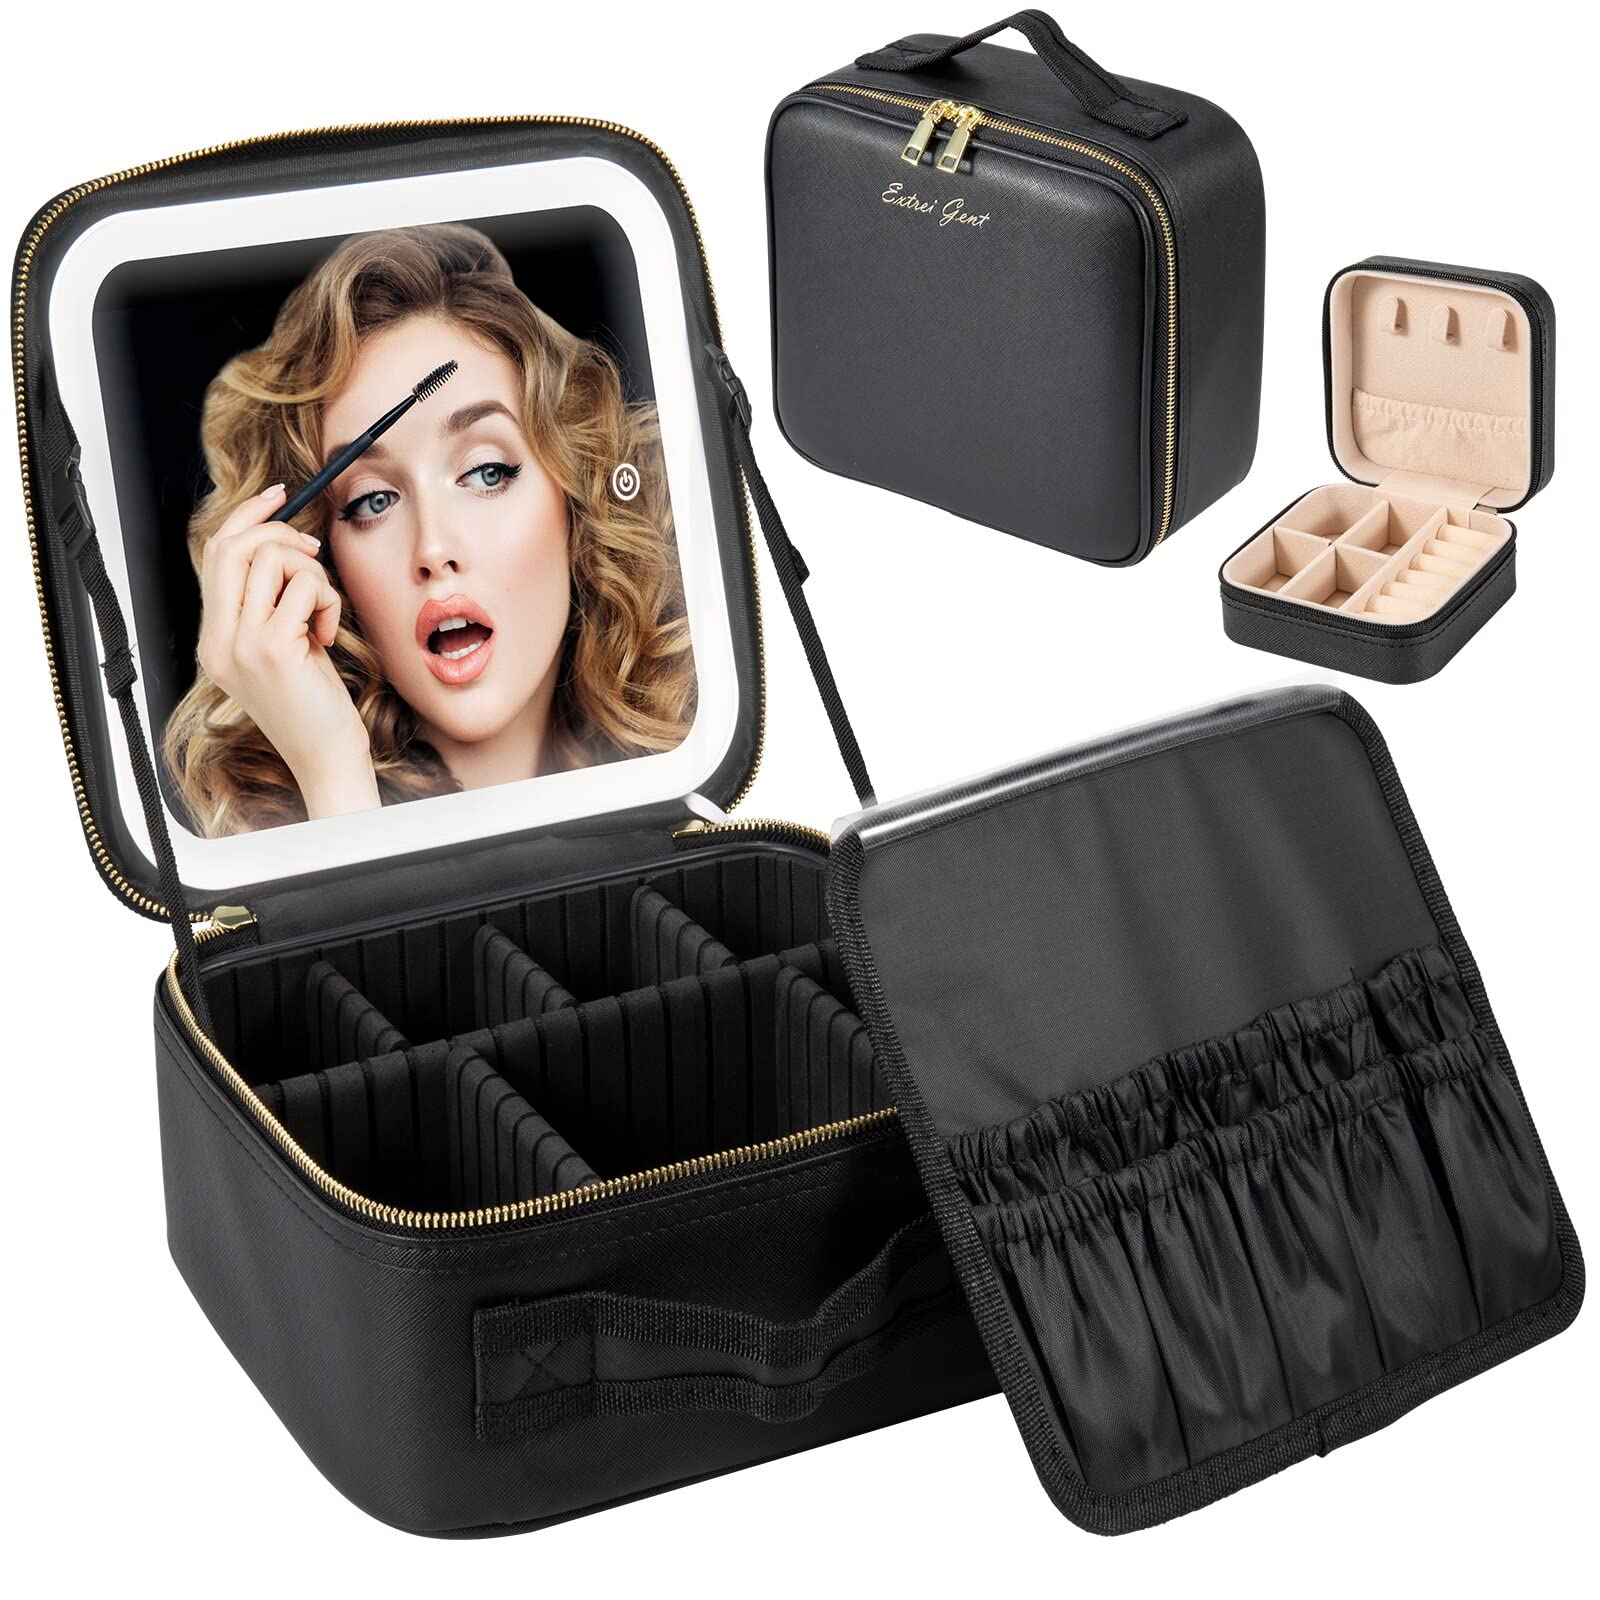  Extrei Gent Makeup Travel Train Case with Mirror LED Light 3  Adjustable Brightness Cosmetic Bag Portable Storage Adjustable Partition  Waterproof Brushes Makeup Jewelry Gift for Women, Black : Beauty & Personal